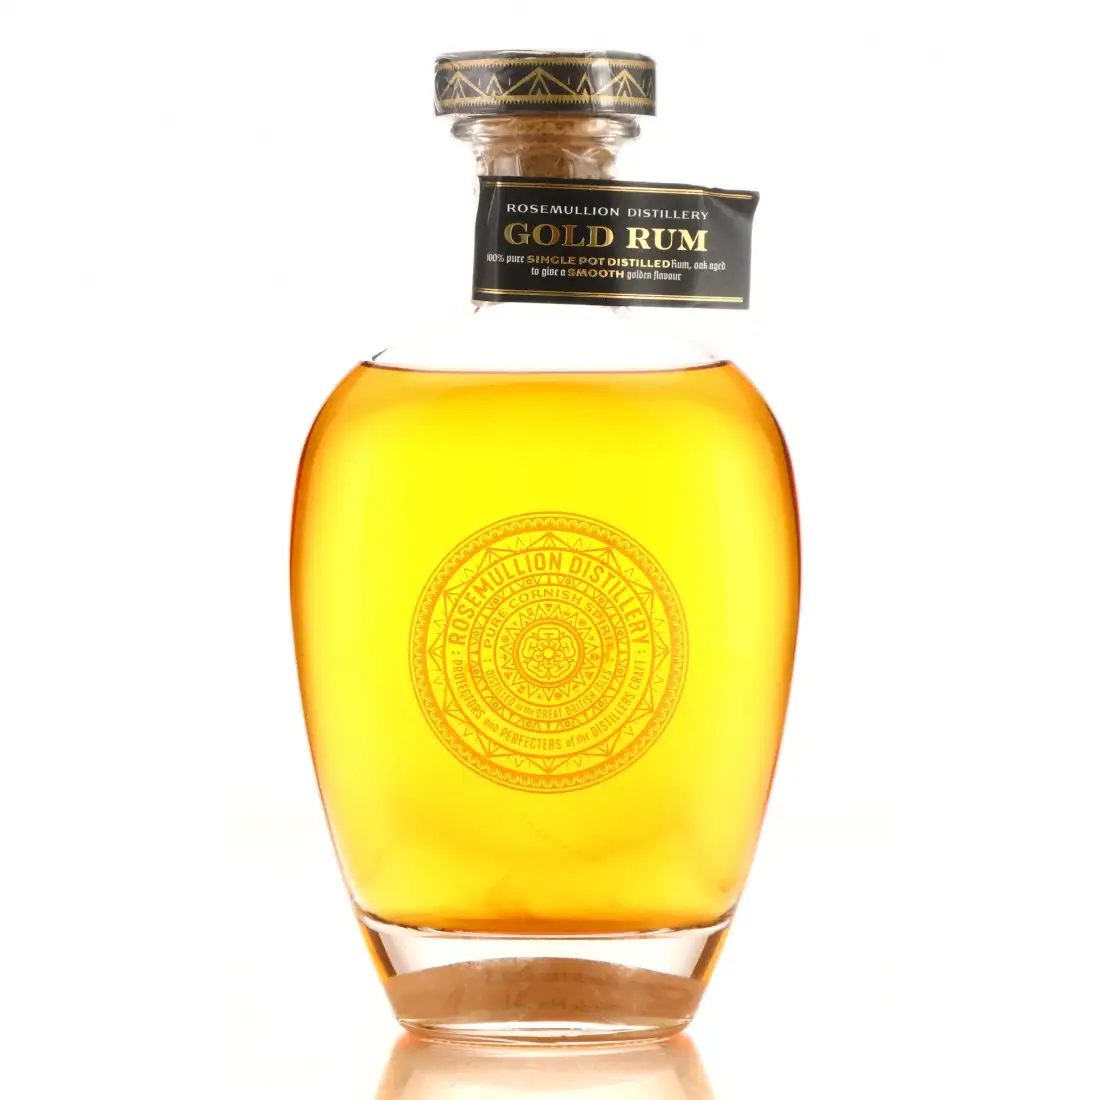 Image of the front of the bottle of the rum Gold Rum